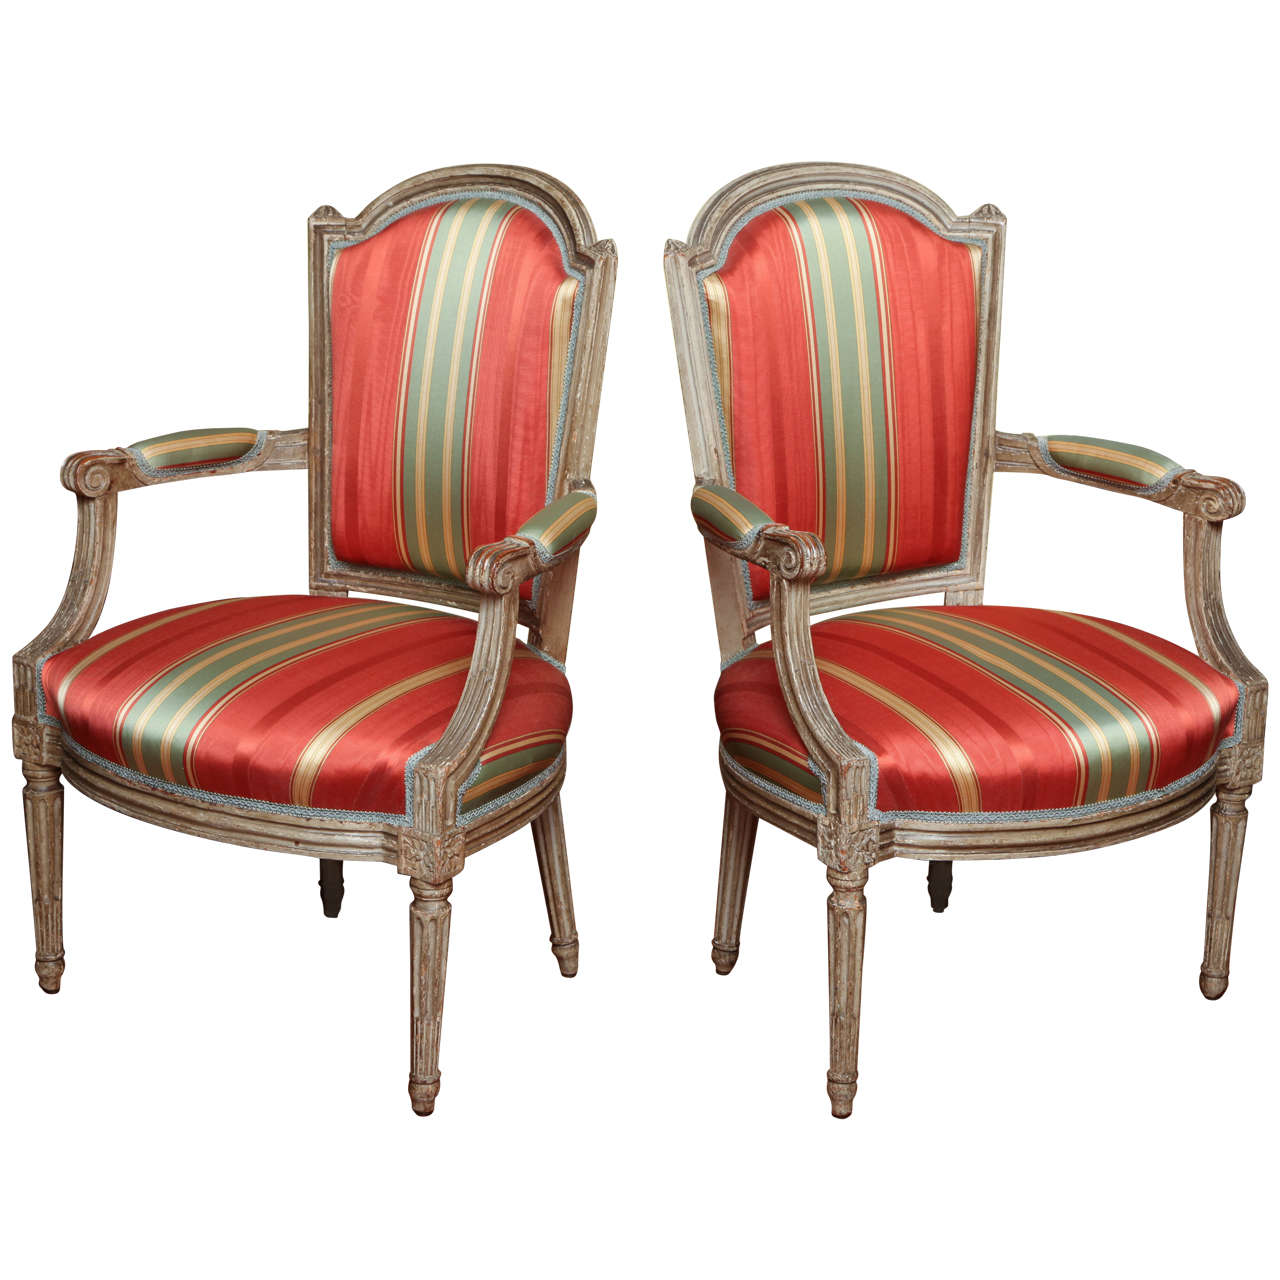 Set of Four Louis XVI Period Gray Painted Fauteuils, circa 1785 For Sale